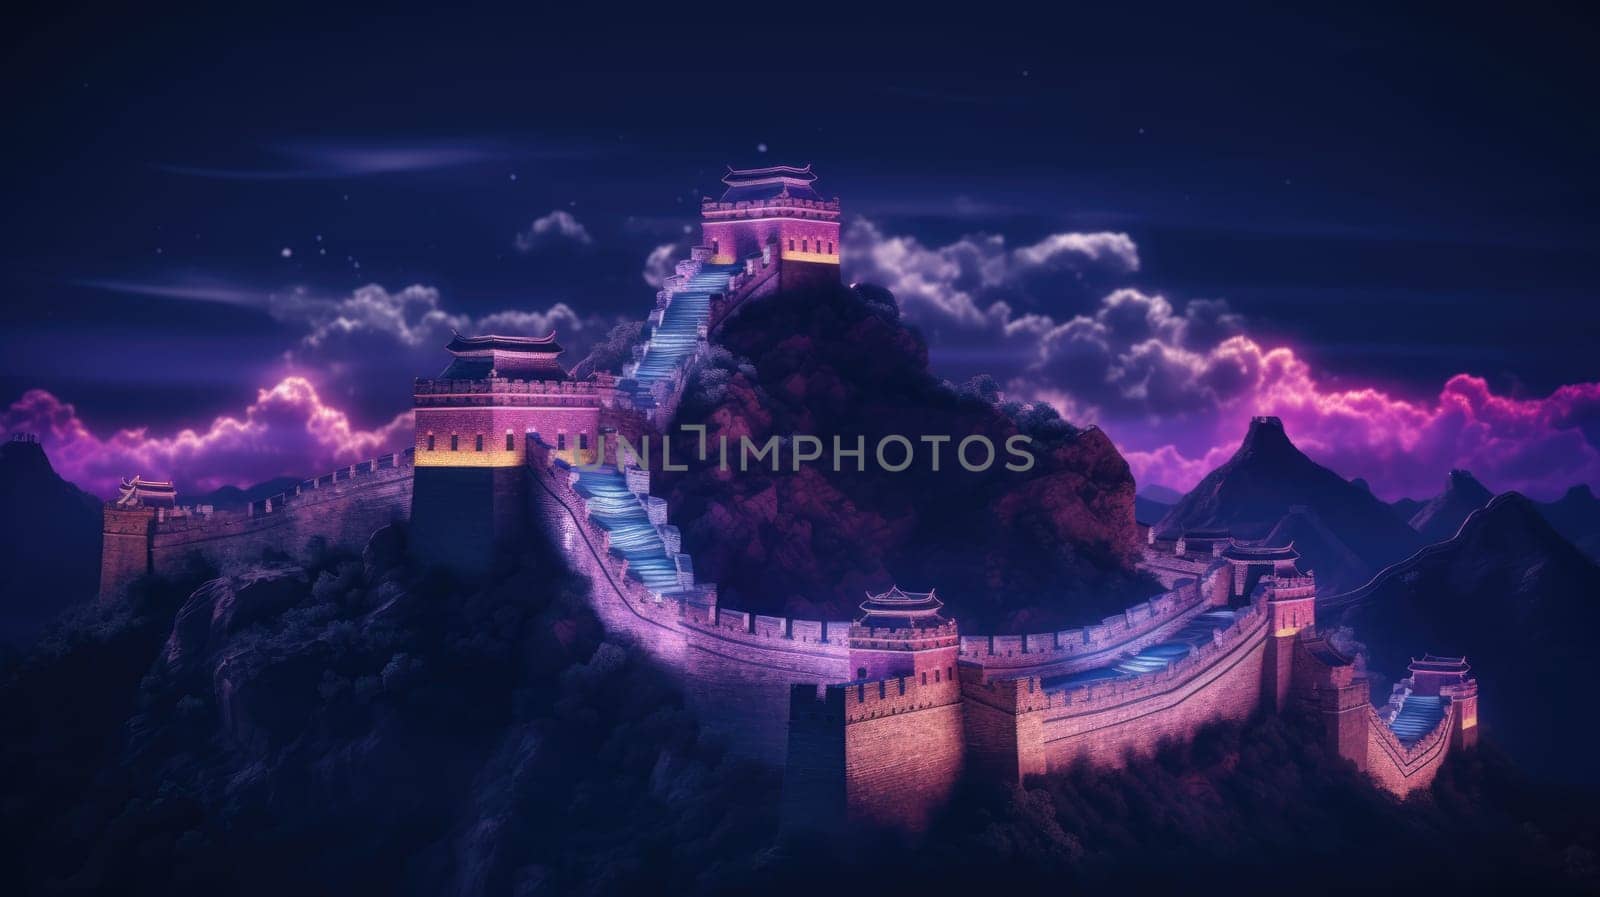 A captivating digital illustration showcasing the majestic Great Wall of China at night, bathed in a colorful display of pink and purple lights under a stunning purple sky.